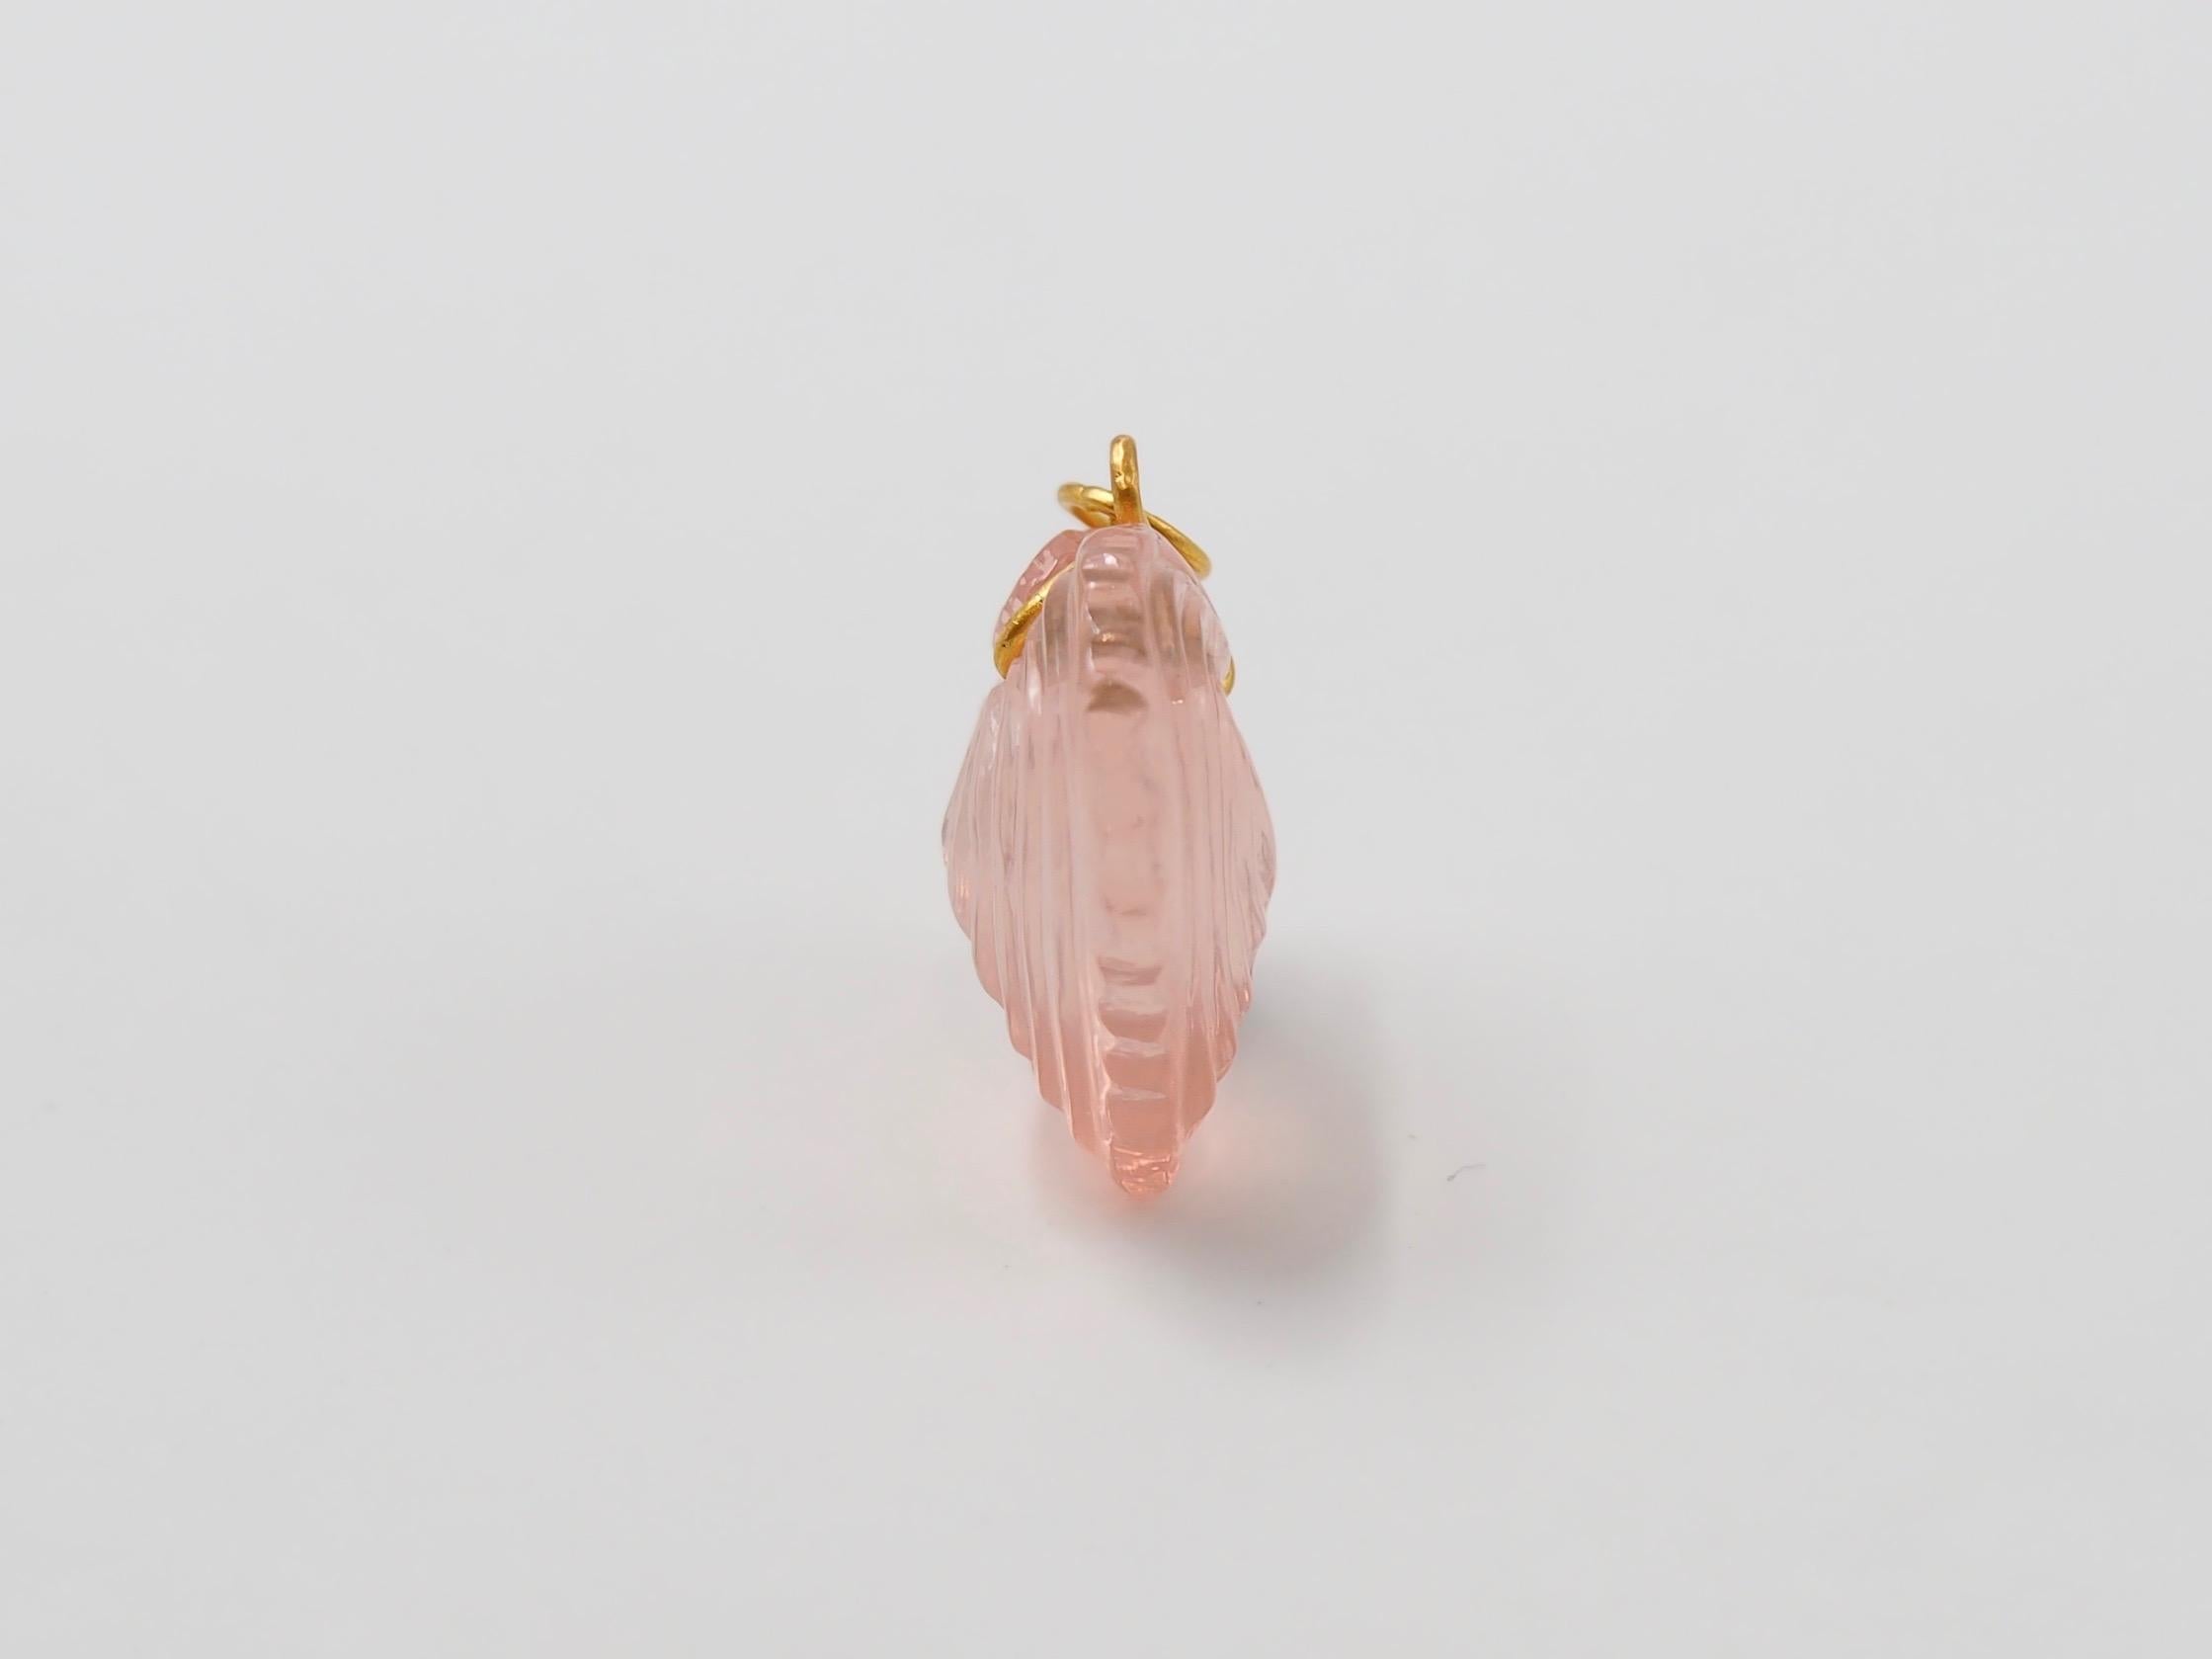 Hand-carved and handmade, this pendant represents a heart seashell in rose quartz. The stone is simply drilled to allow a curved 22 karat gold wire that is twisted and finishes with a ring. 

2 sizes exist as you can see on one of the photo. This